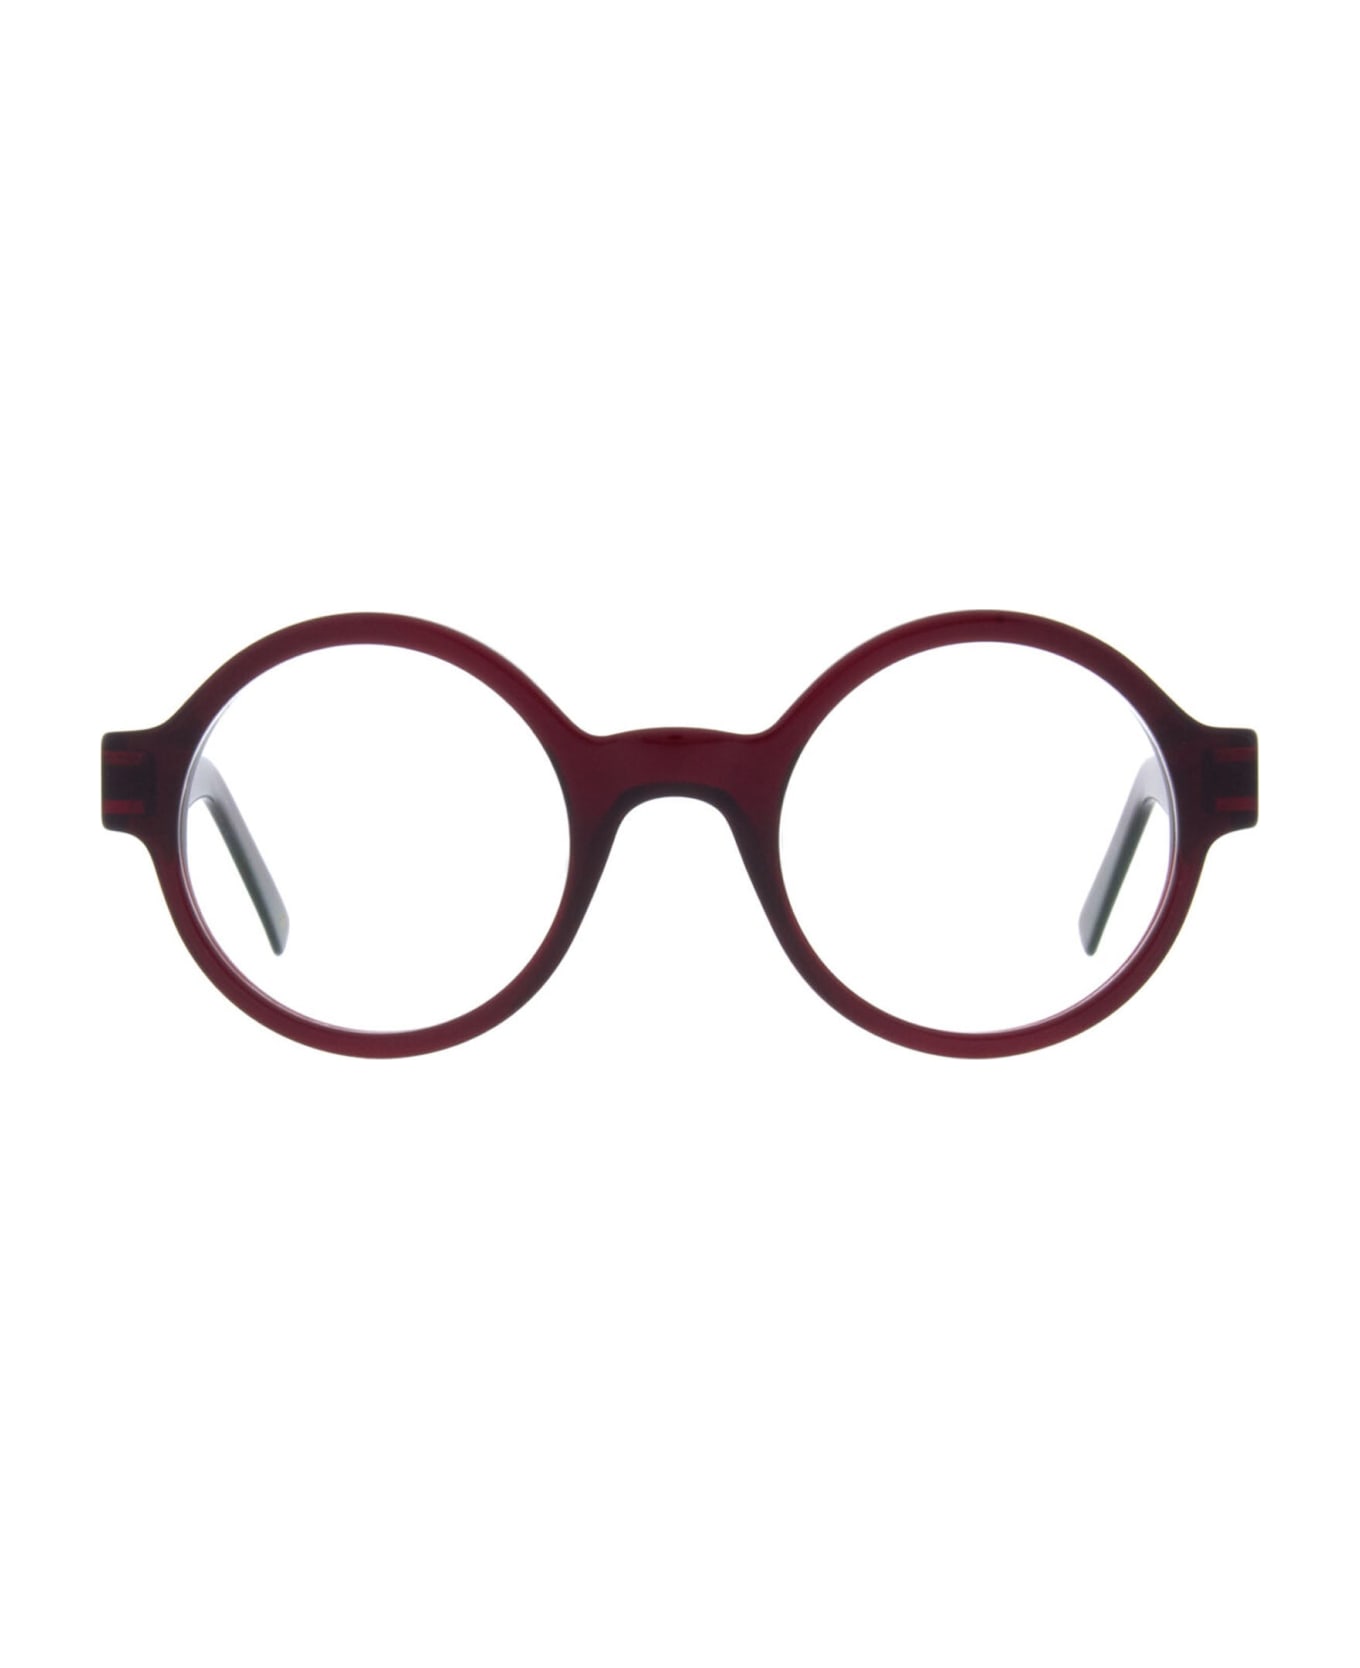 Andy Wolf Aw02 - Red / Gold Glasses - burgundy